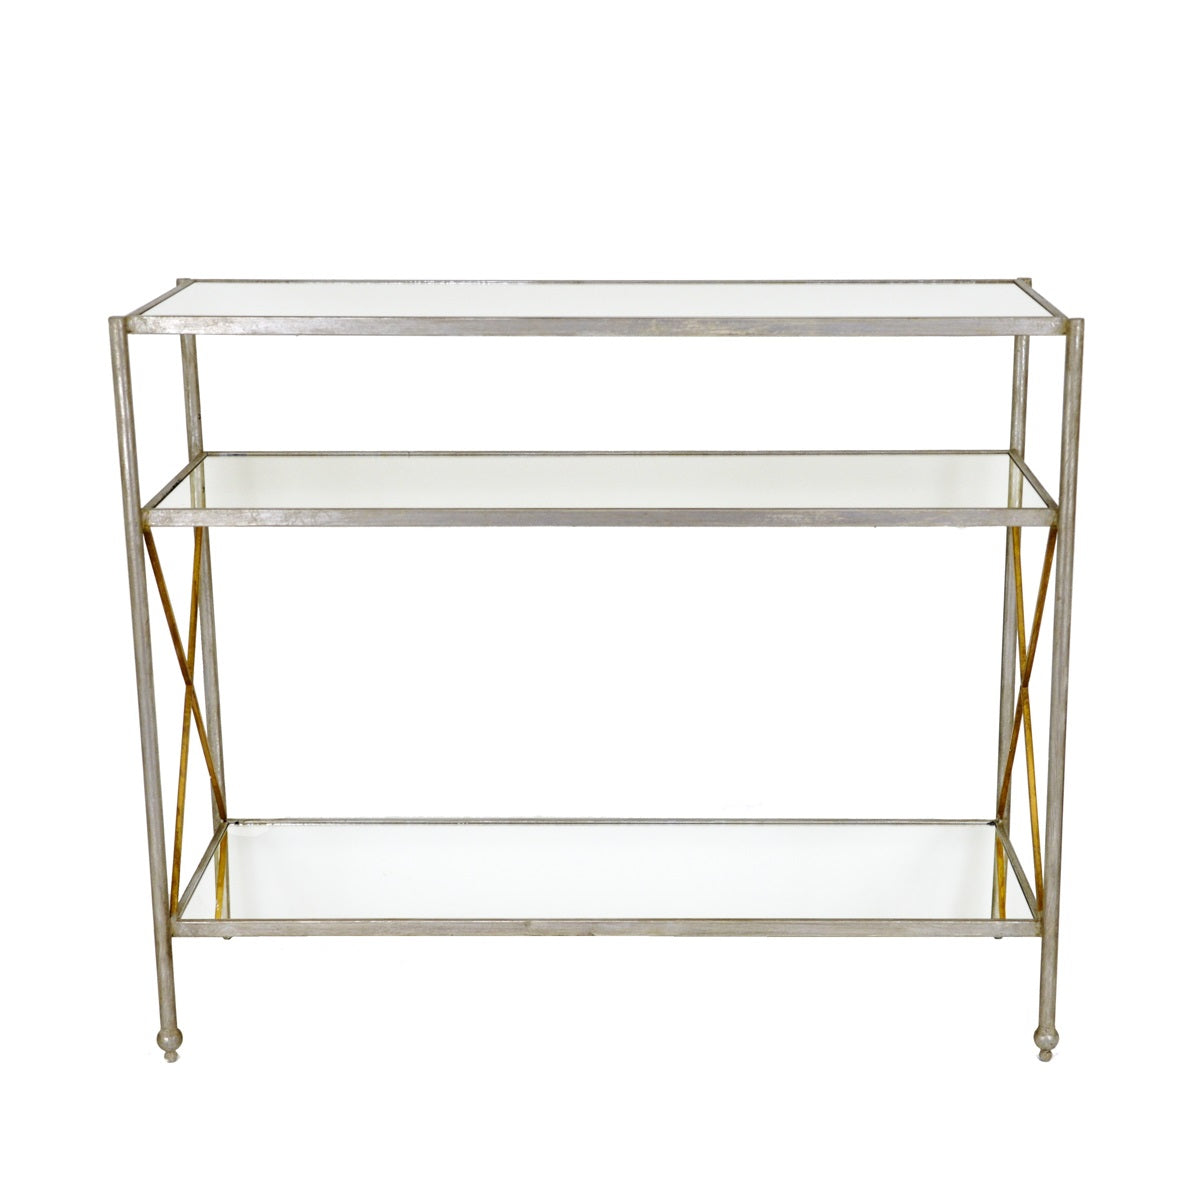 Alan Silver Console Table with 3 Shelves - Lillian Home 